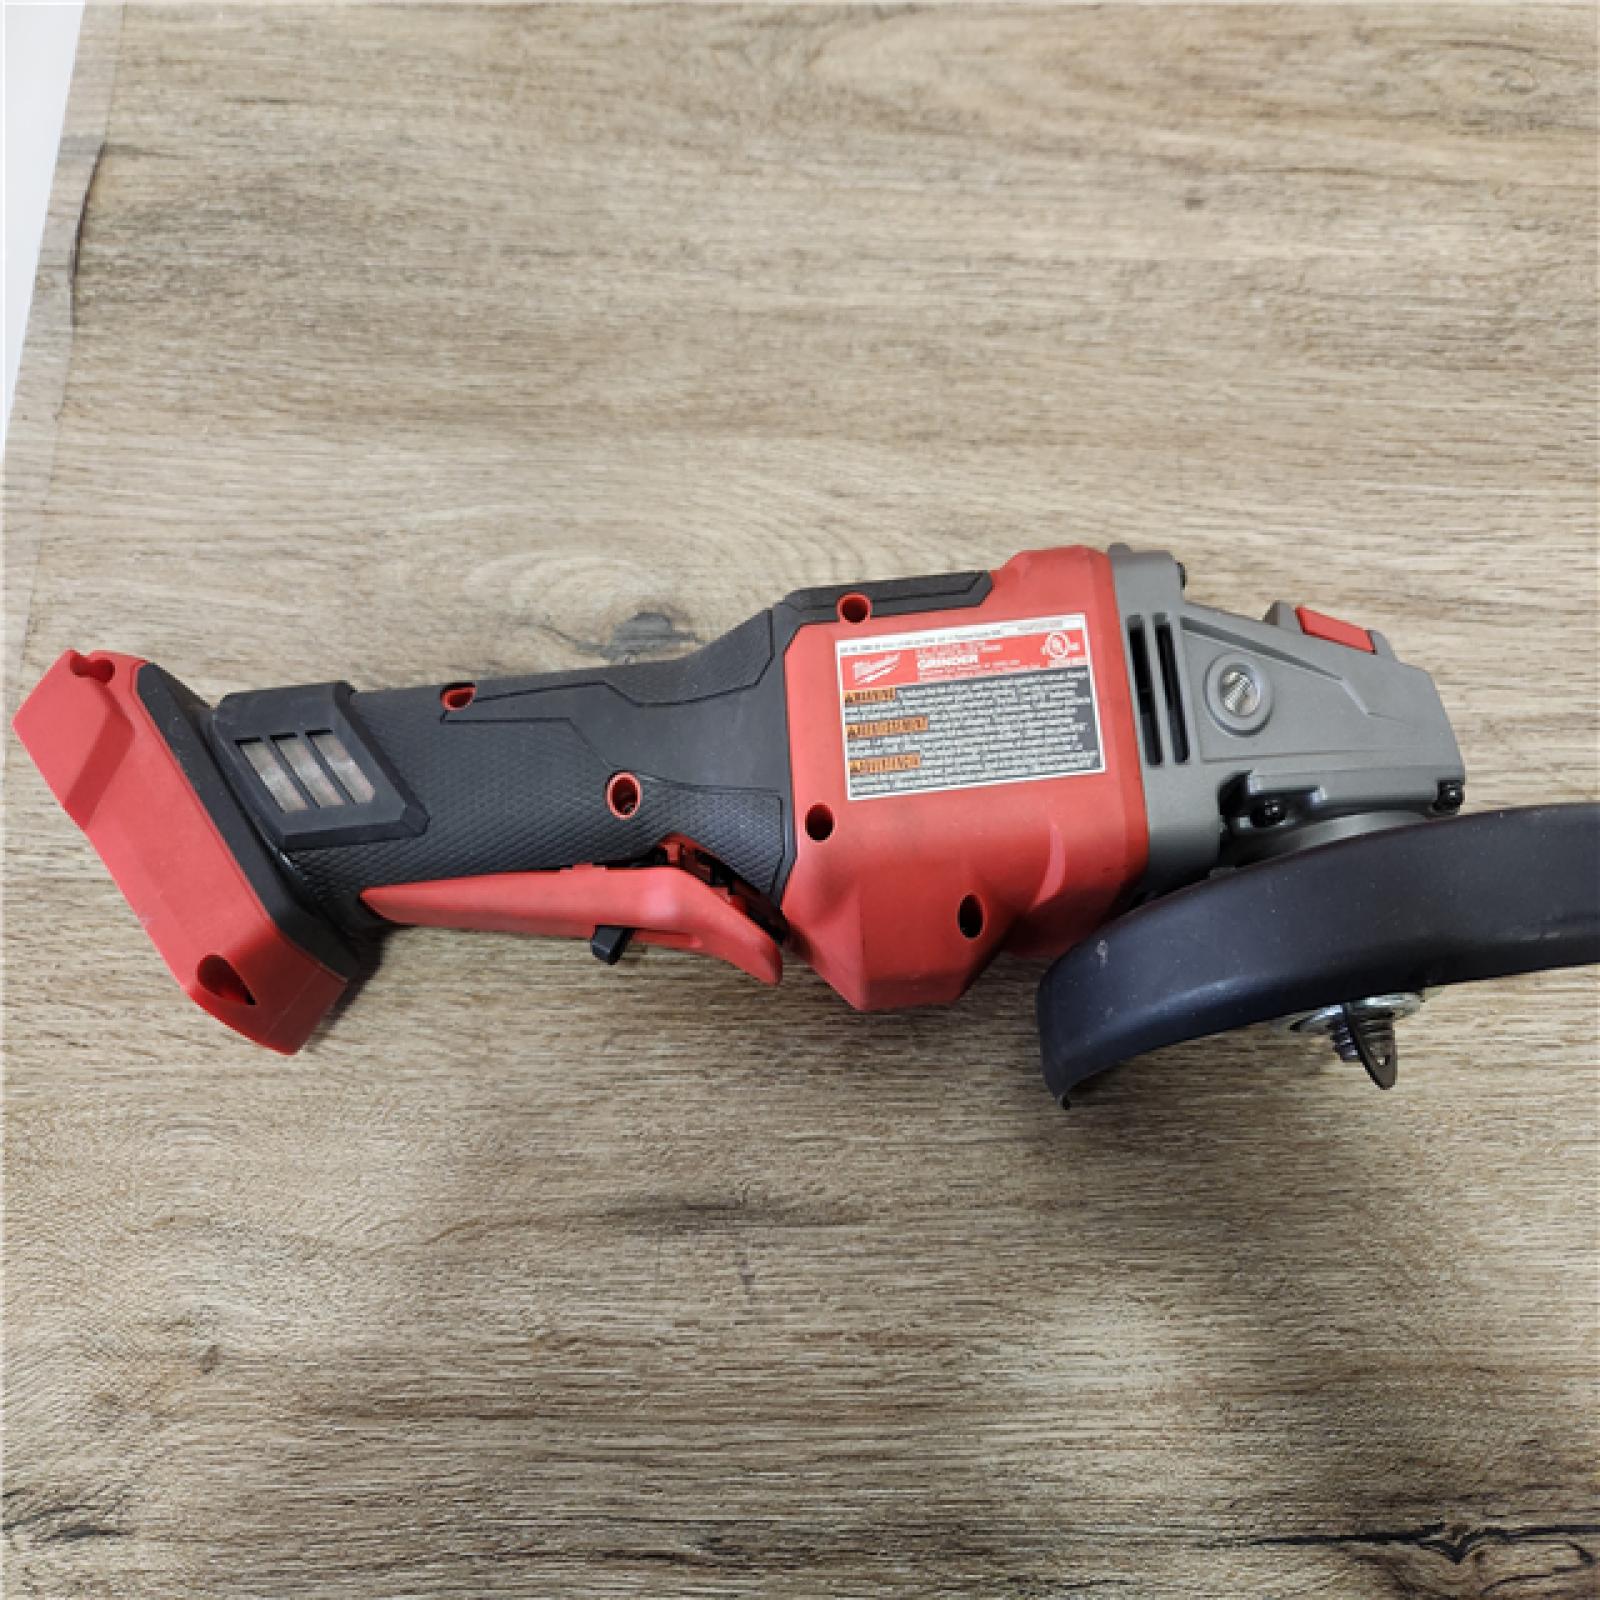 Phoenix Location NEW Milwaukee M18 FUEL 18V Lithium-Ion Brushless Cordless 4-1/2 in./6 in. Braking Grinder with Paddle Switch (Tool-Only)